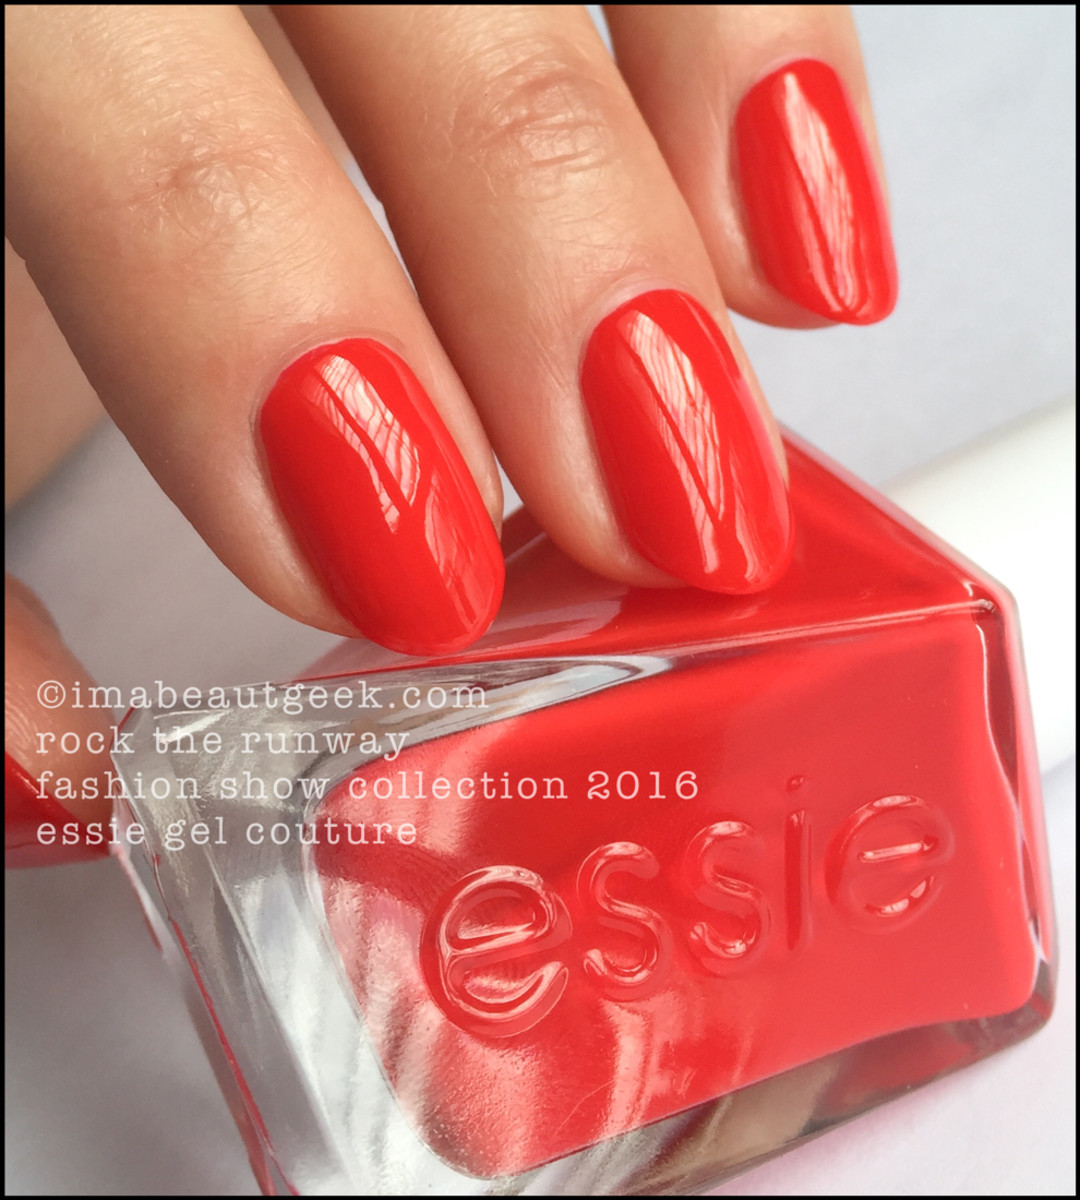 Essie Rock the Runway_Essie Gel Couture Review Swatches 2016